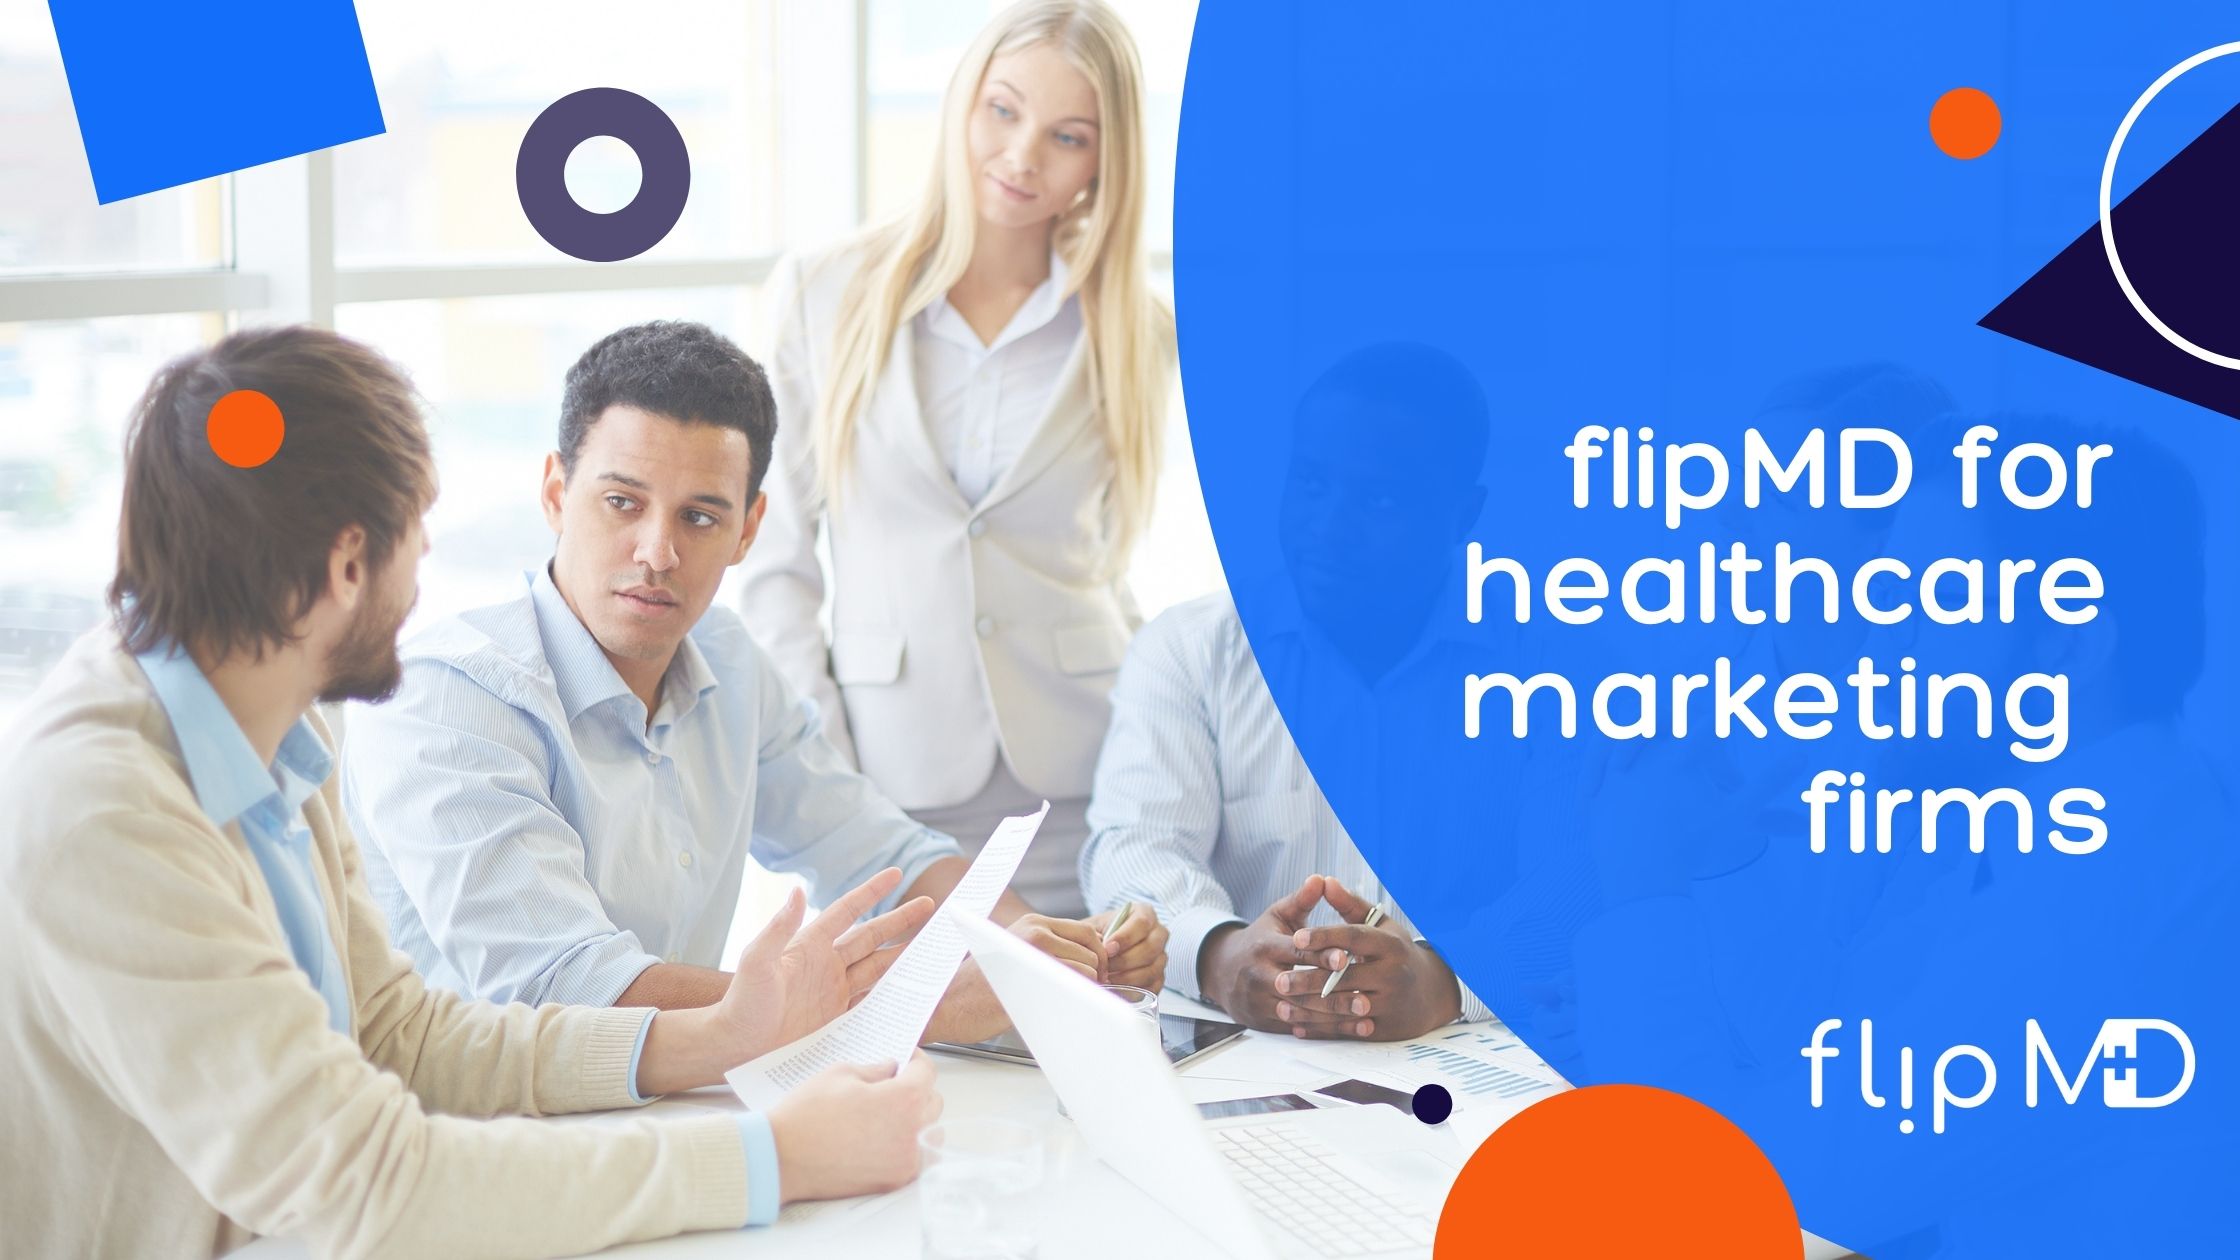 healthcare marketing firm meeting to discuss flipmd project